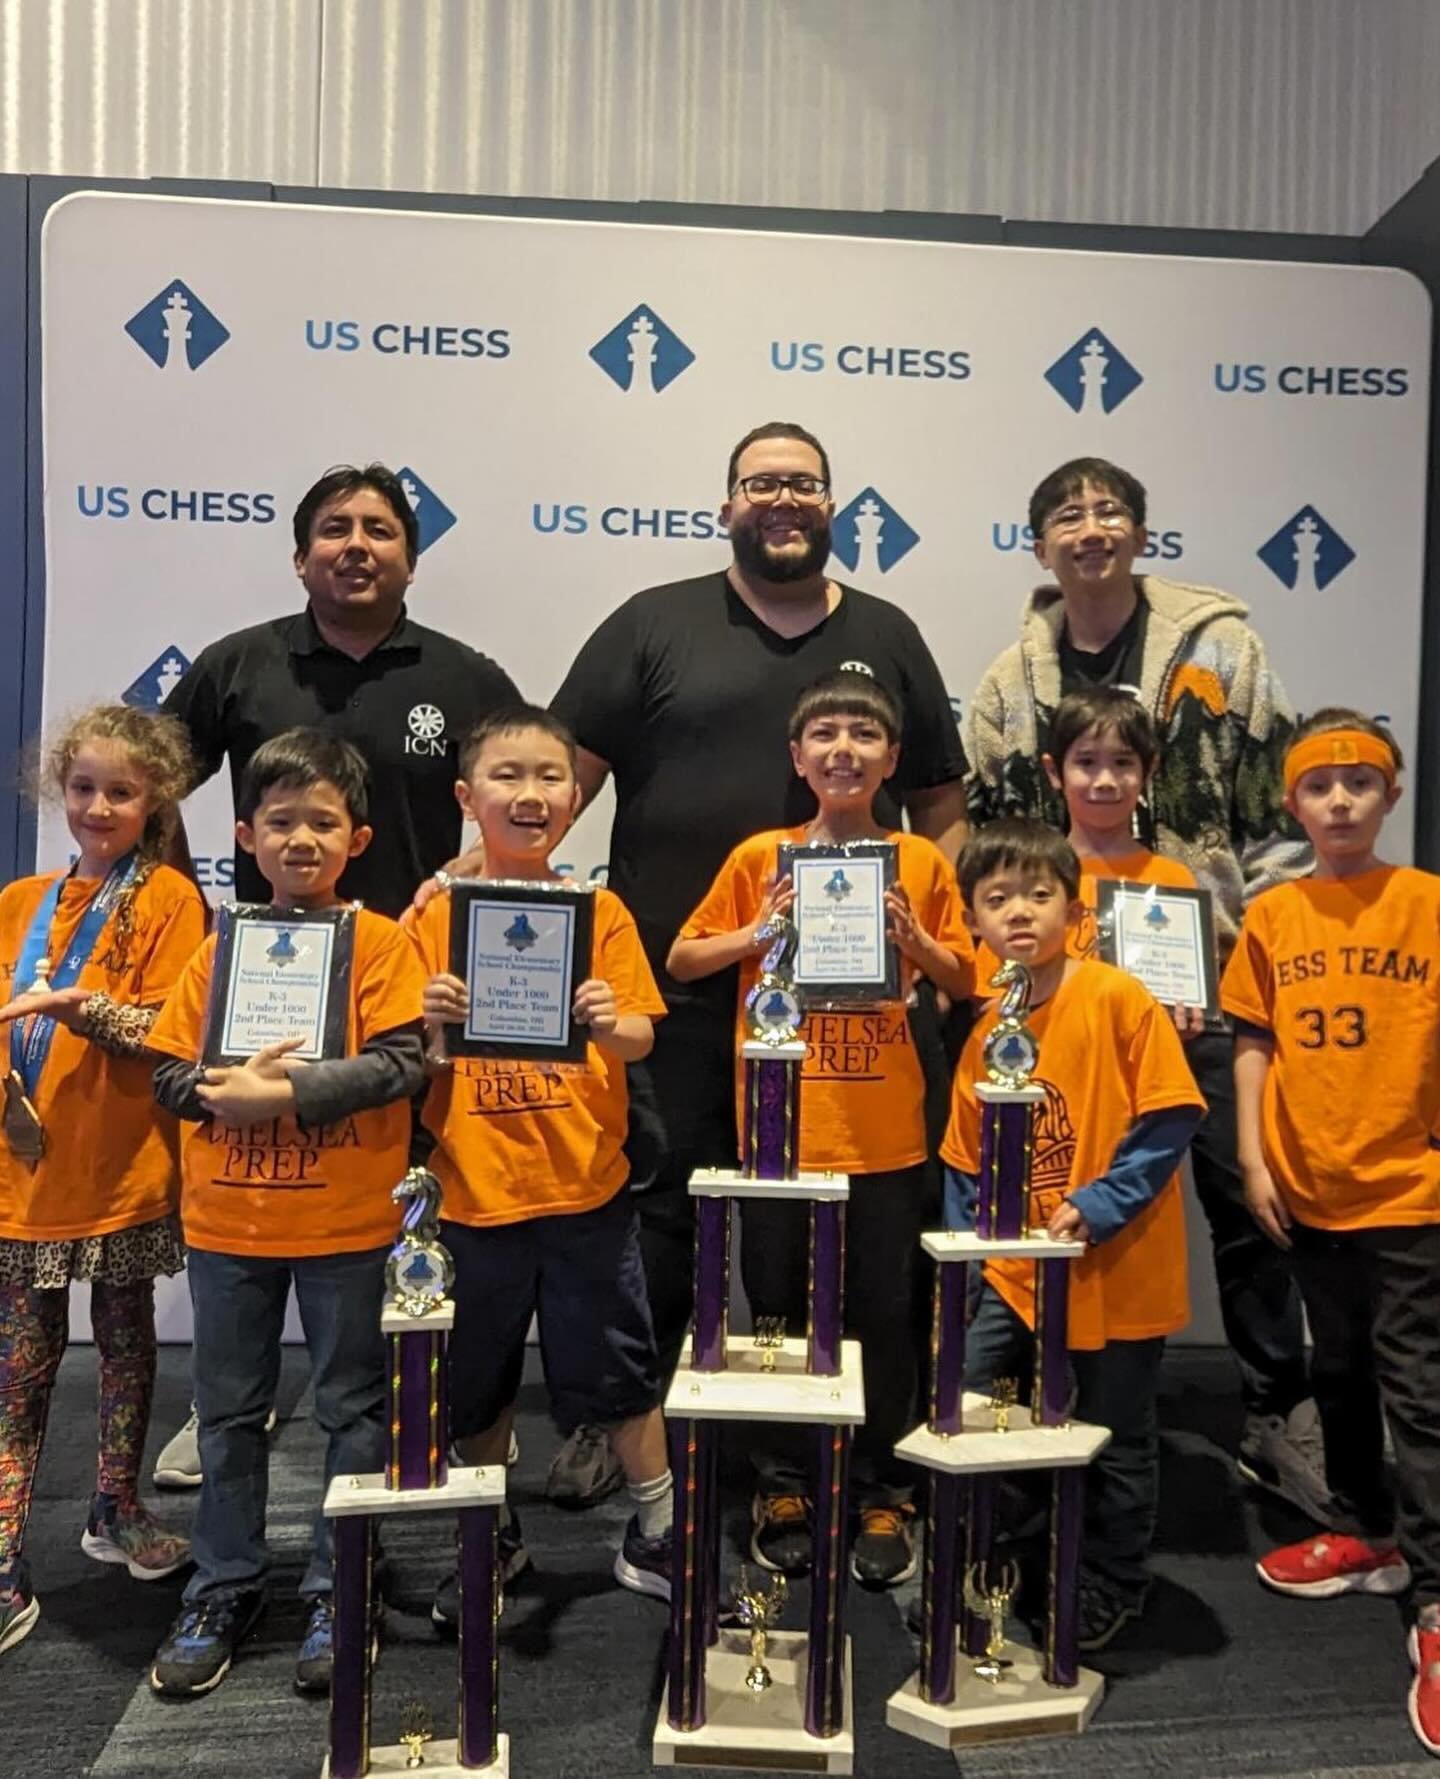 Huge Congrats to PS 33 team on their performance at the Elementary Nationals! K5 Champ 6th place, 7th u1200, 2nd u1000, and 3rd in K3 Blitz! Well done! #ps33chess #chelseaprepchess